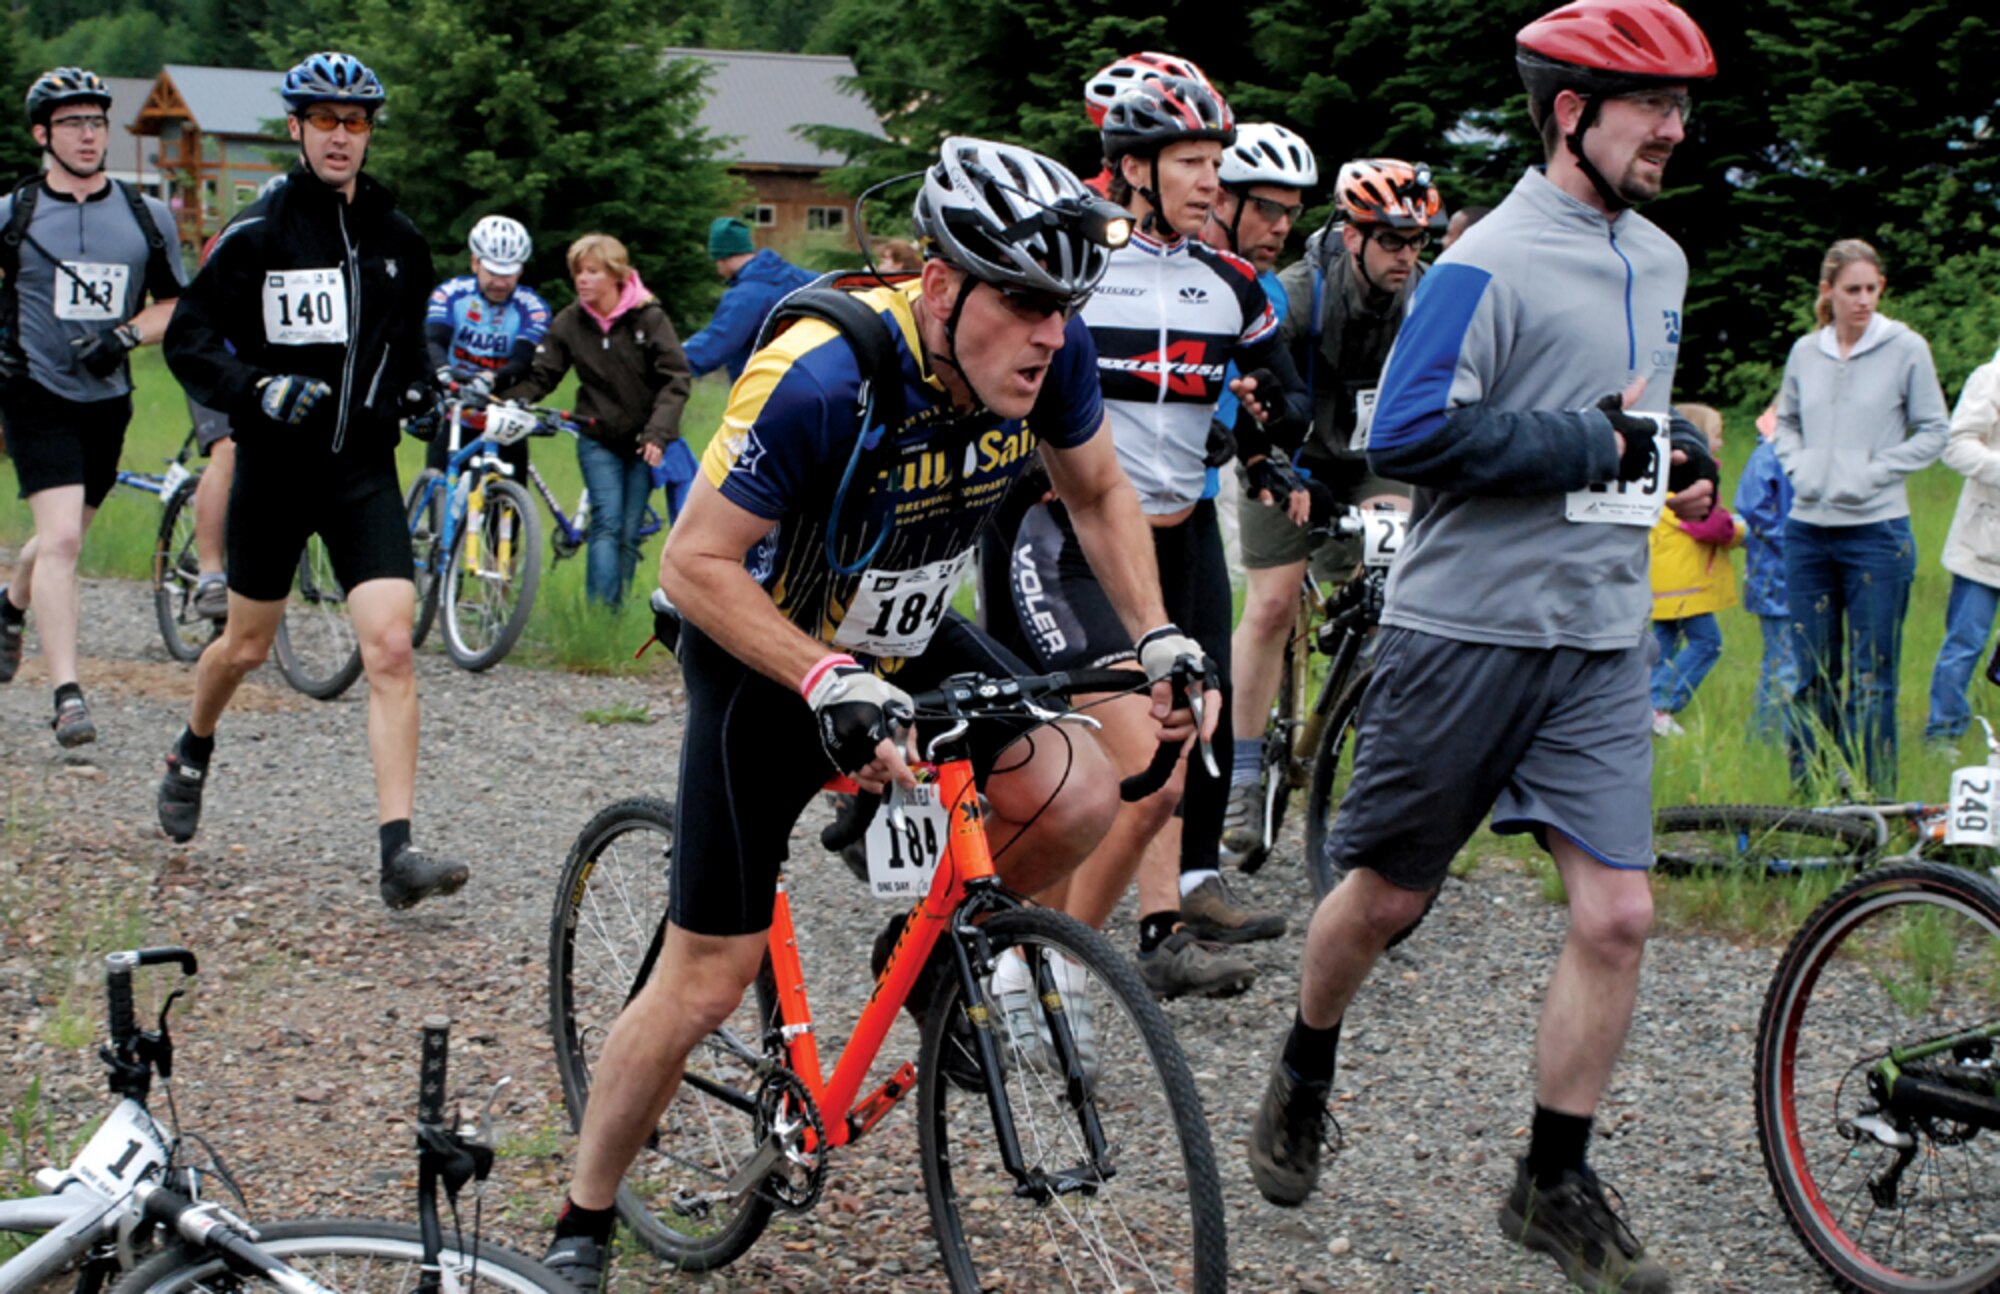 Maj. Timothy Greminger, on bike, competes in the Mountain to Sound relay race near Seattle. A reservist with the 446th Airlift Wing, Major Greminger, from the 728th Airlift Squadron, and 14 other people from McChord, participated in the 100-mile adventure relay from Snoqualmie Pass to Puget Sound, June 24.  (Courtesy photo/Maj. Timothy Greminger)